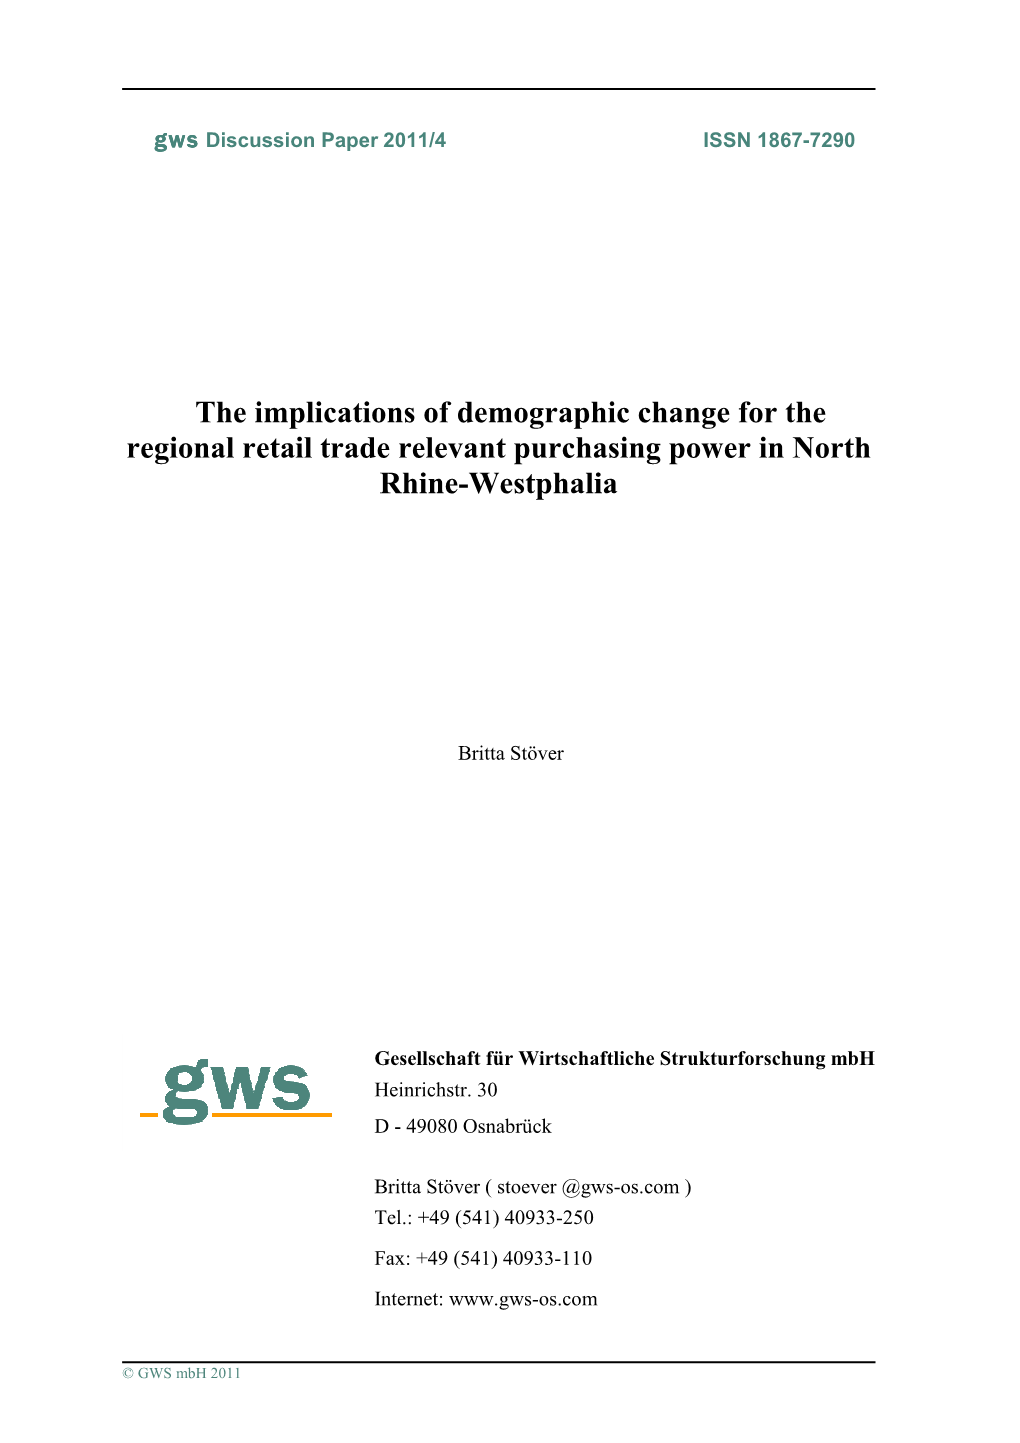 The Implications of Demographic Change for the Regional Retail Trade Relevant Purchasing Power in North Rhine-Westphalia